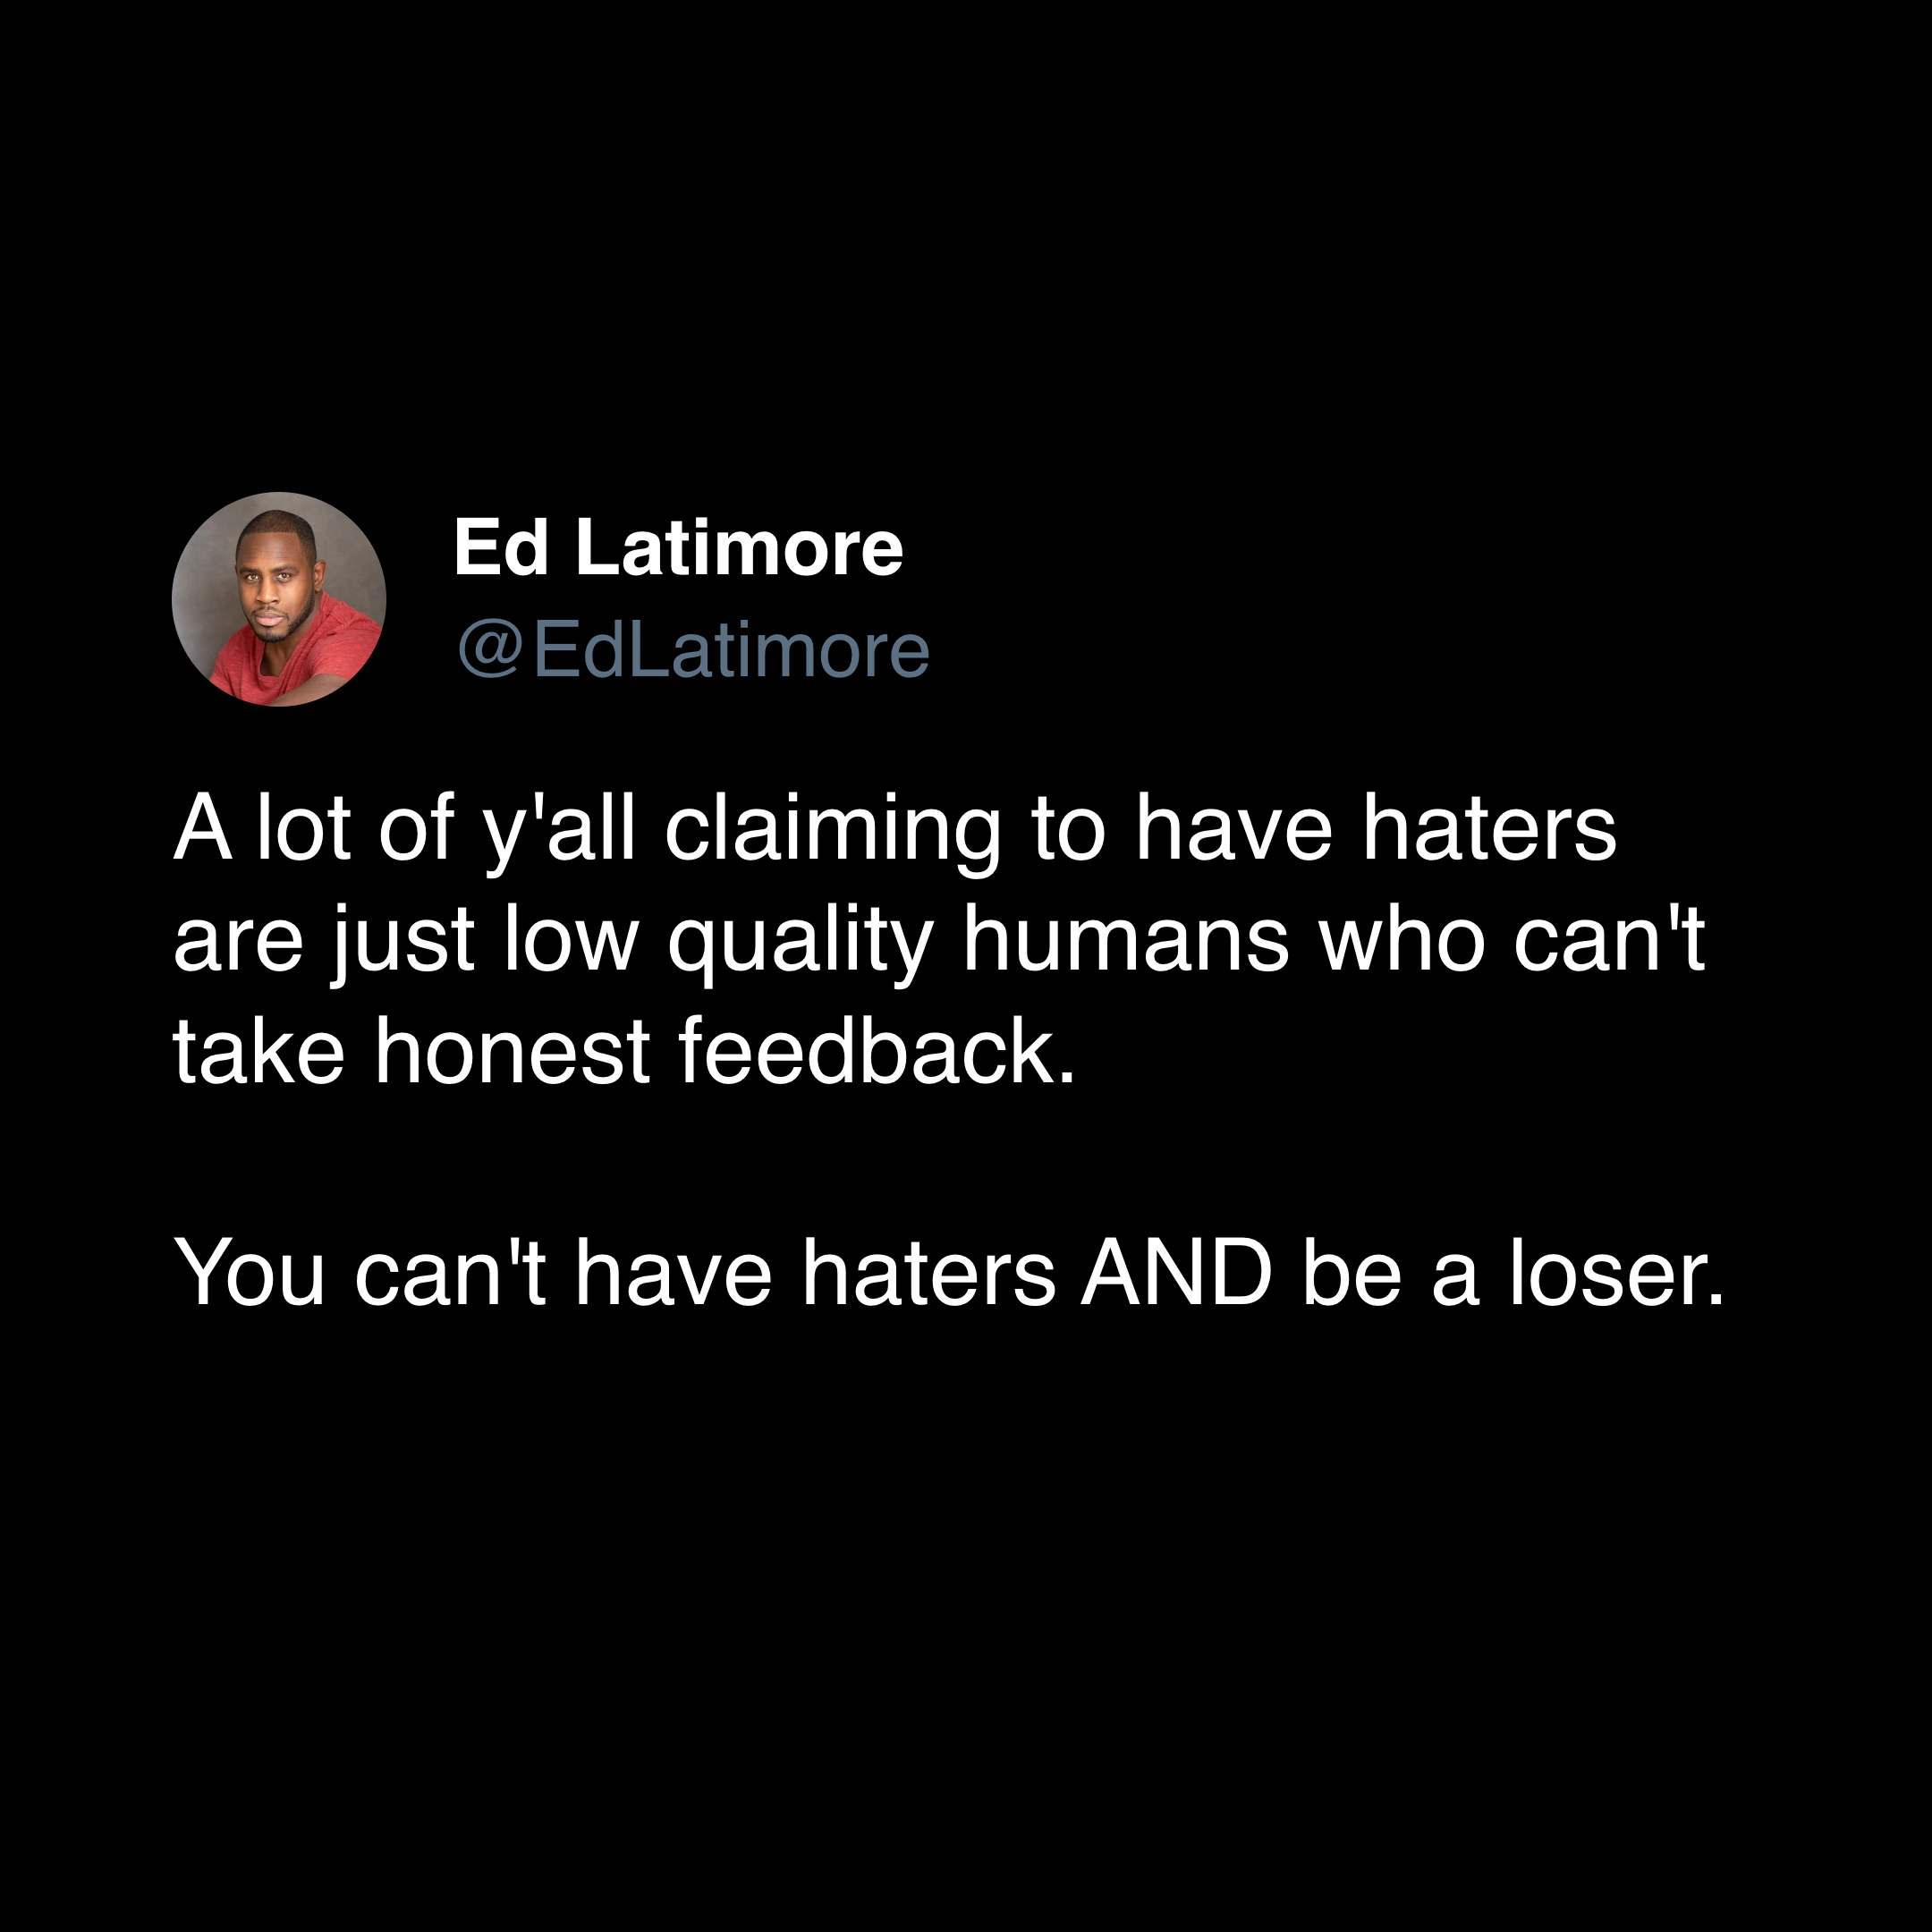 hater quotes "losers cant have haters"